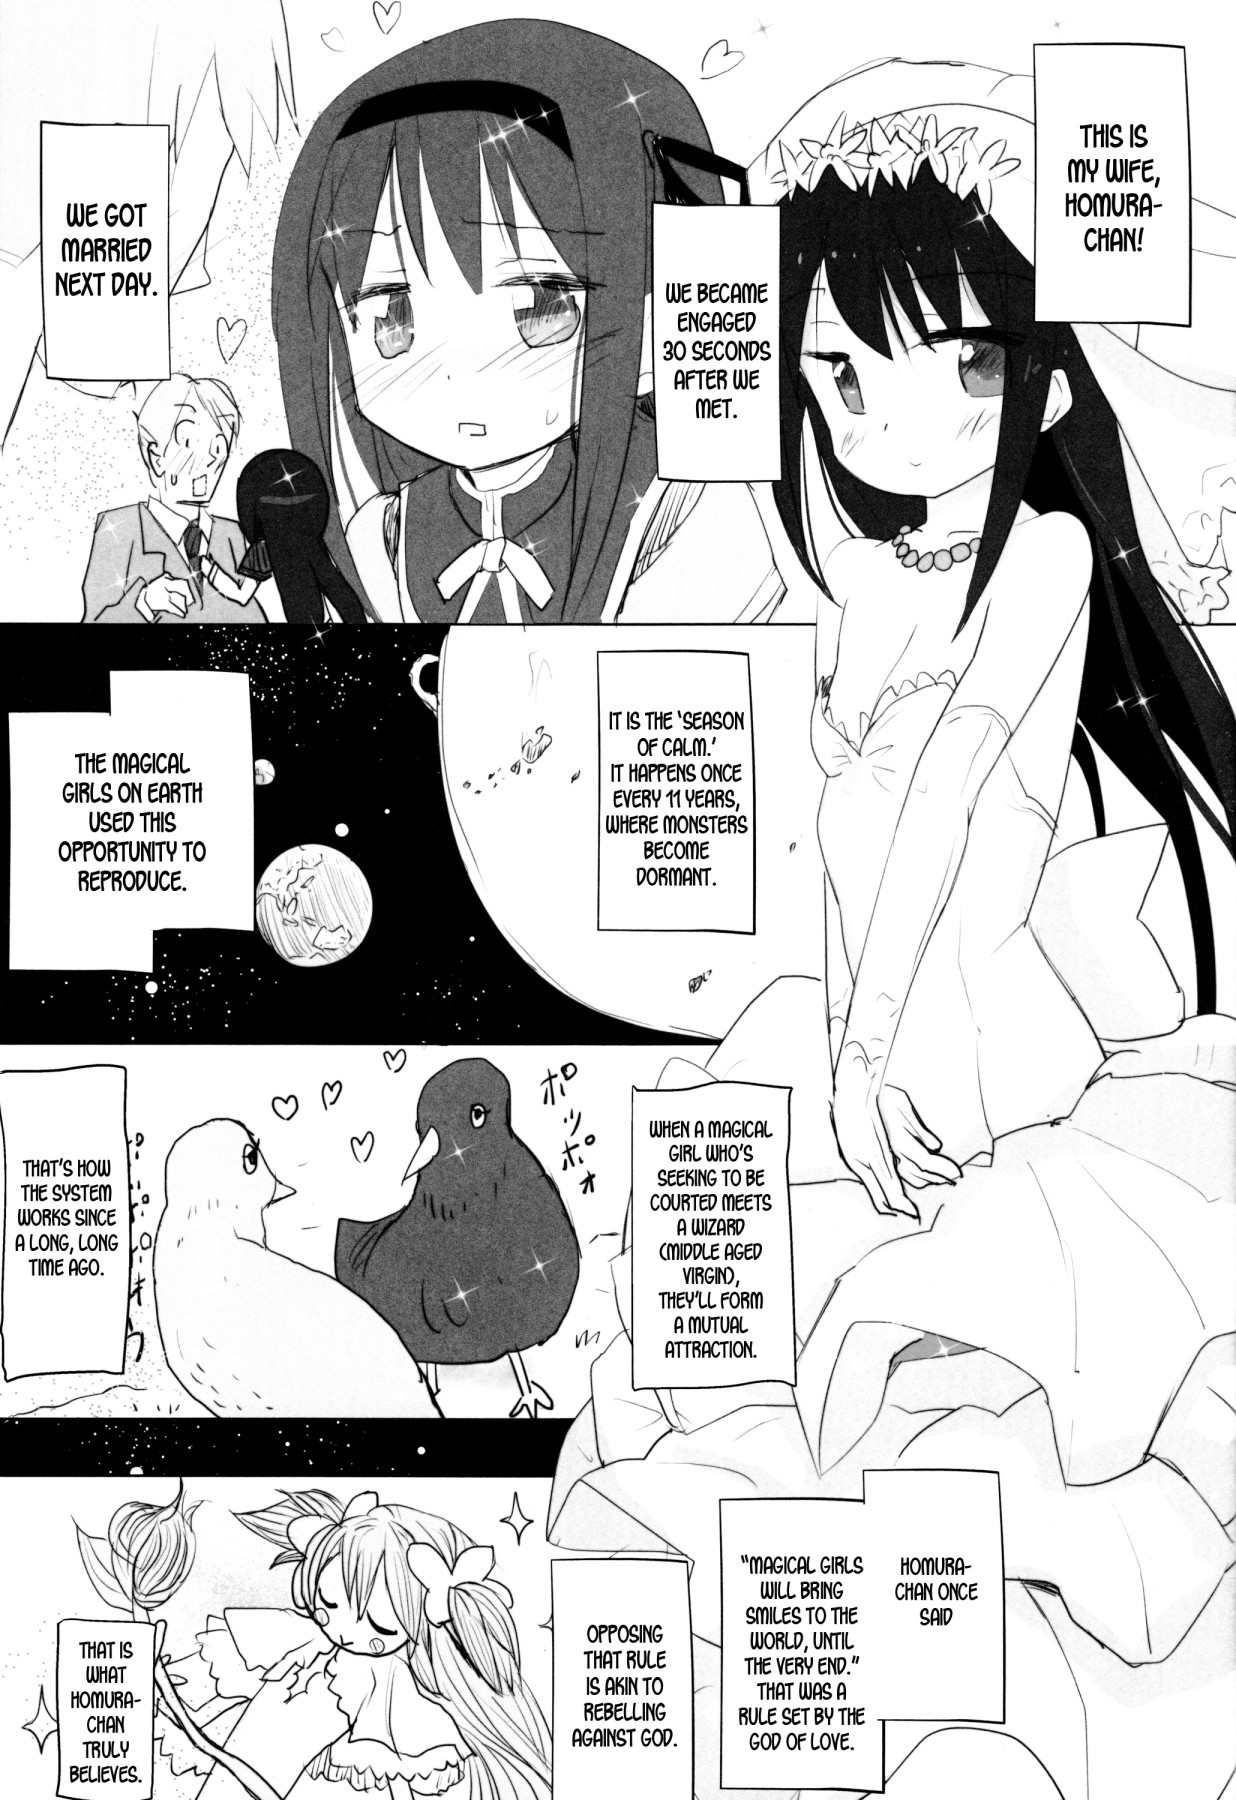 Hentai Manga Comic-Going On a Special honeymoon Vacation With Your loving Homura-chan!!-Read-2